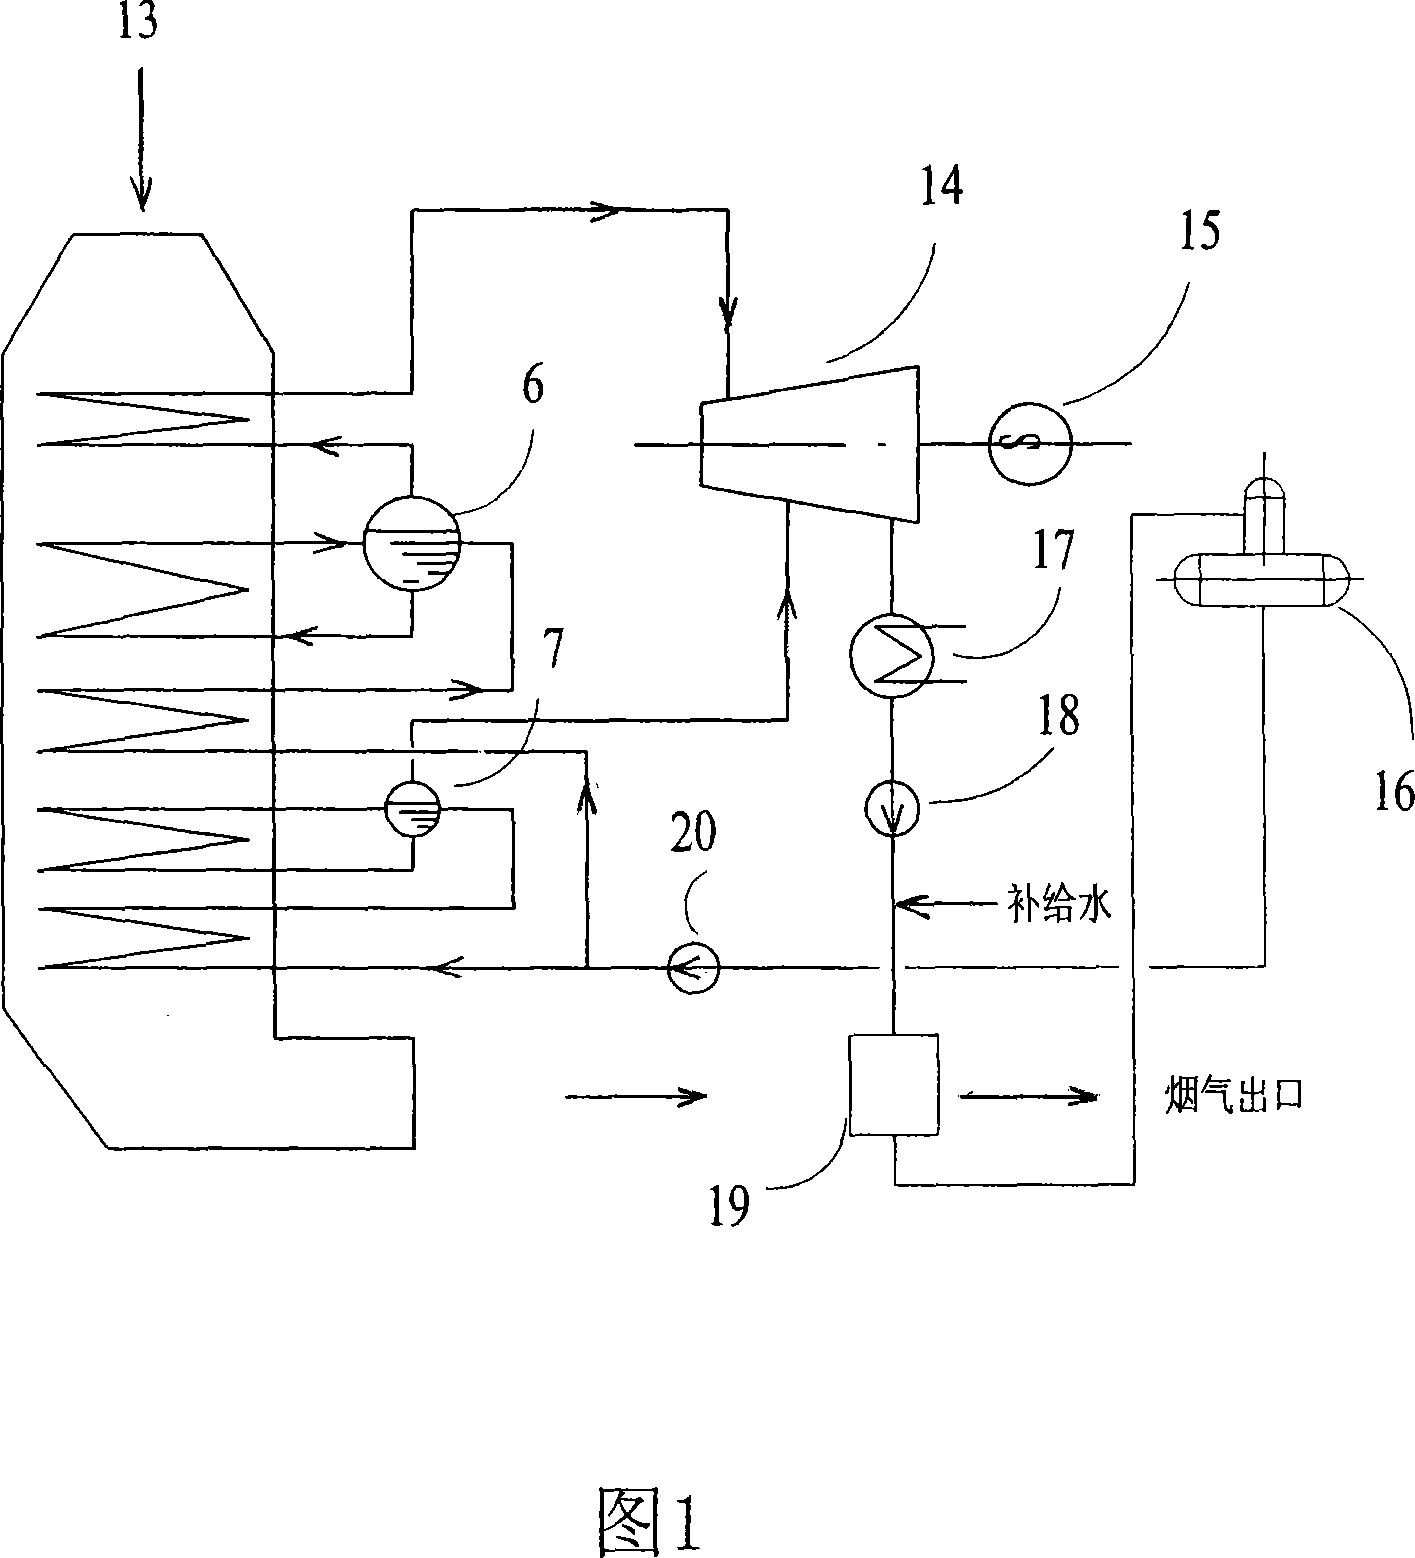 Sinter cooler low temperature waste gas residual heat boiler and power generating system thereof